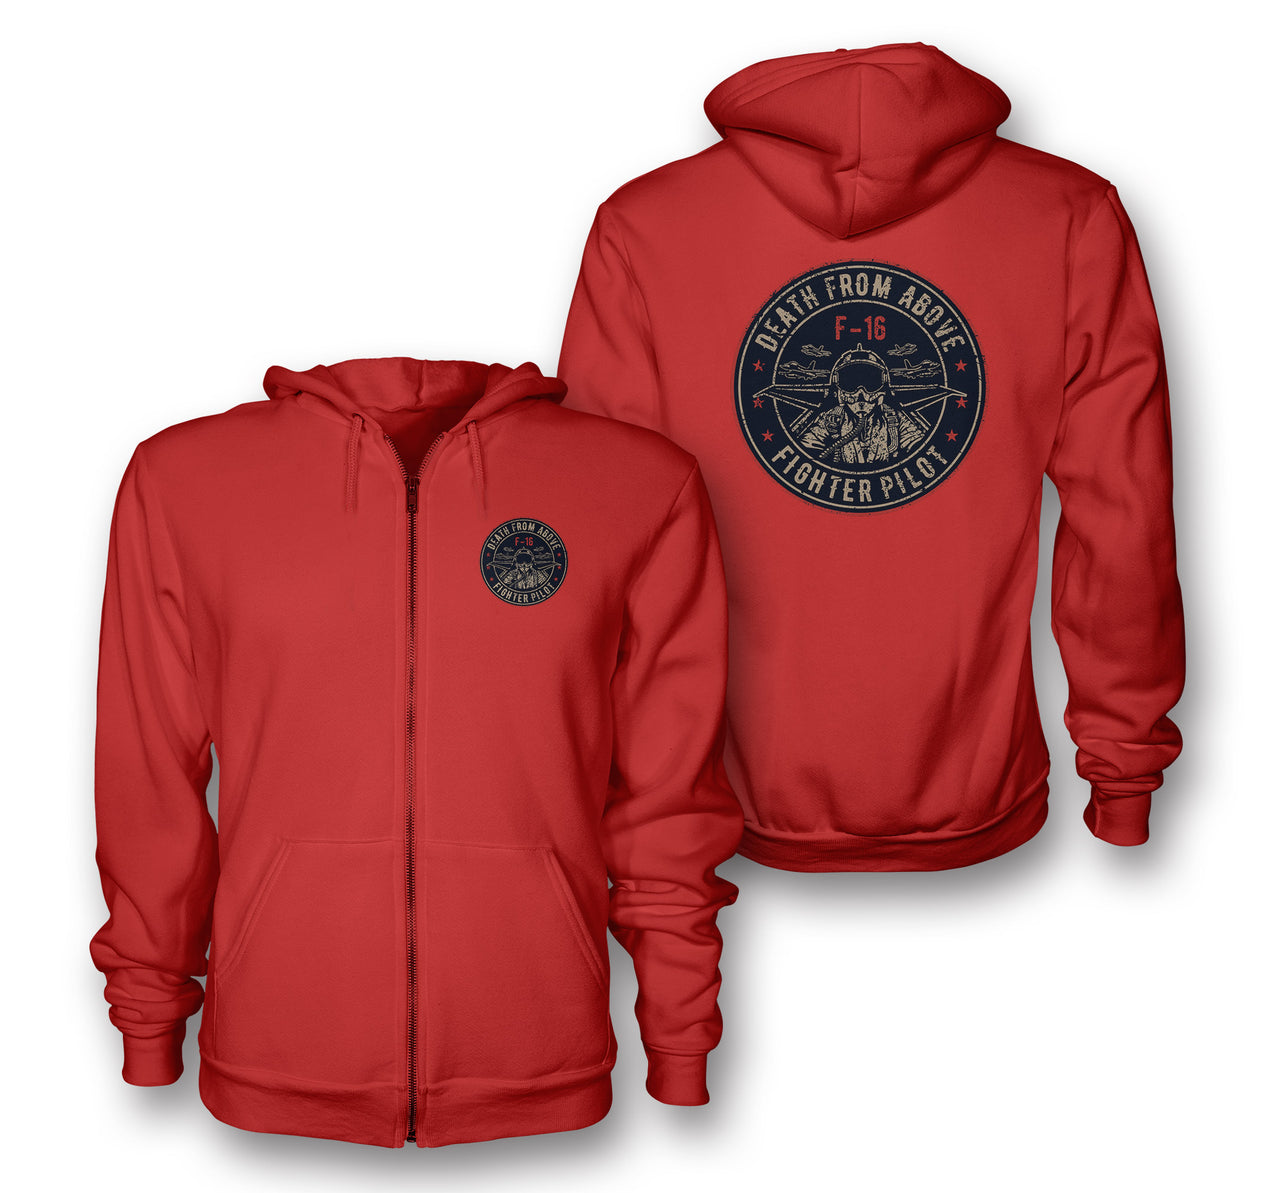 Fighting Falcon F16 - Death From Above Designed Zipped Hoodies